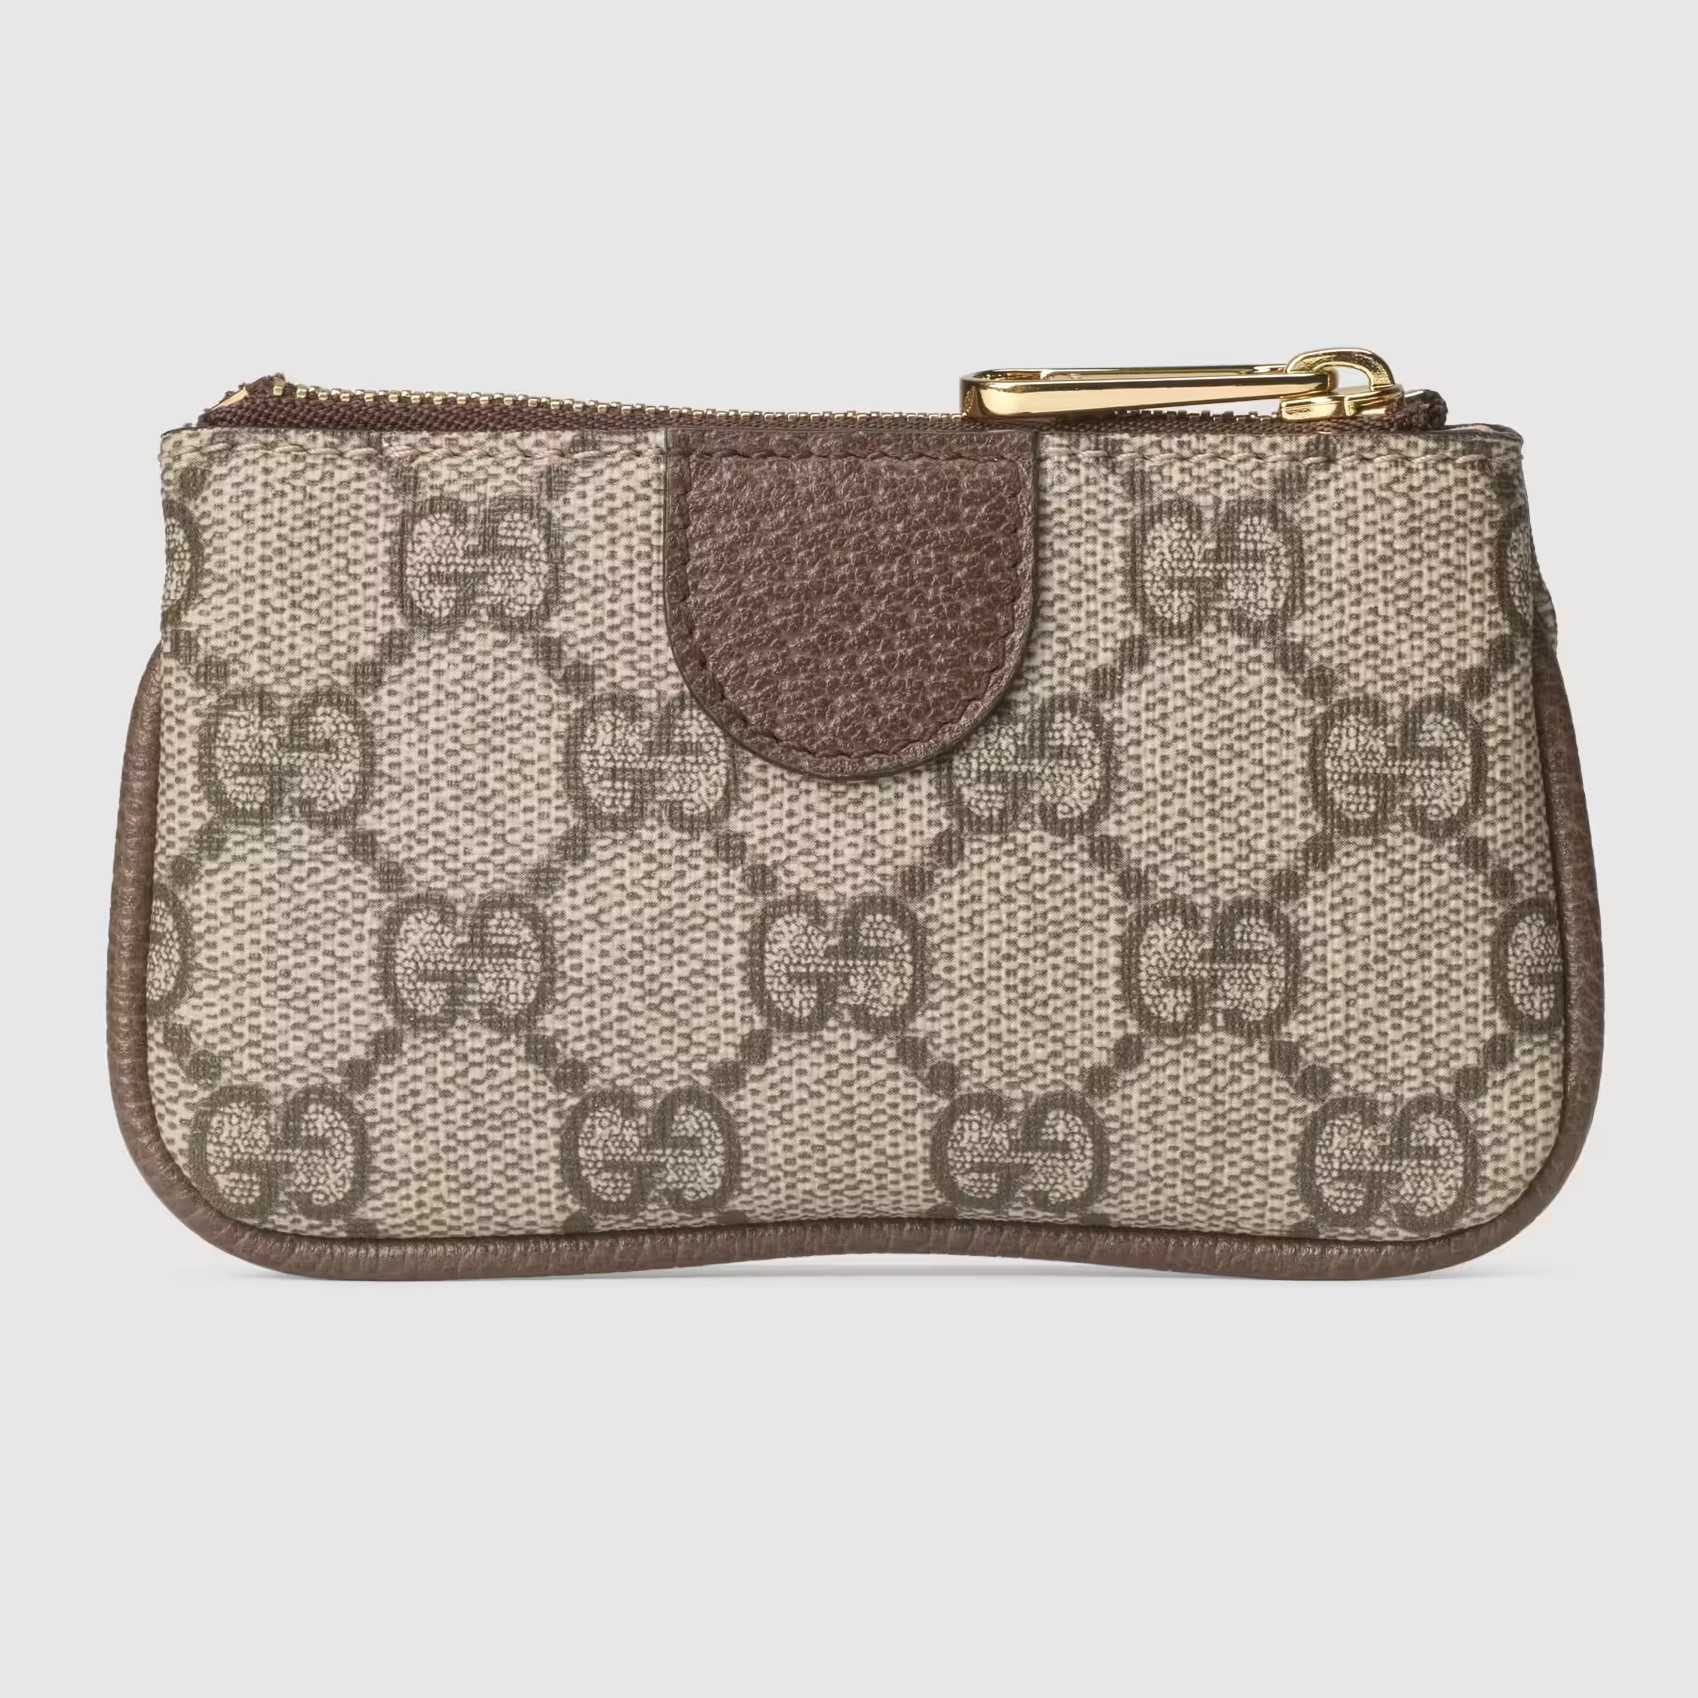 VÍ GUCCI MINI LIGHT OPHIDIA KEY CASE IN BEIGE AND EBONY GG SUPREME CANVAS 3